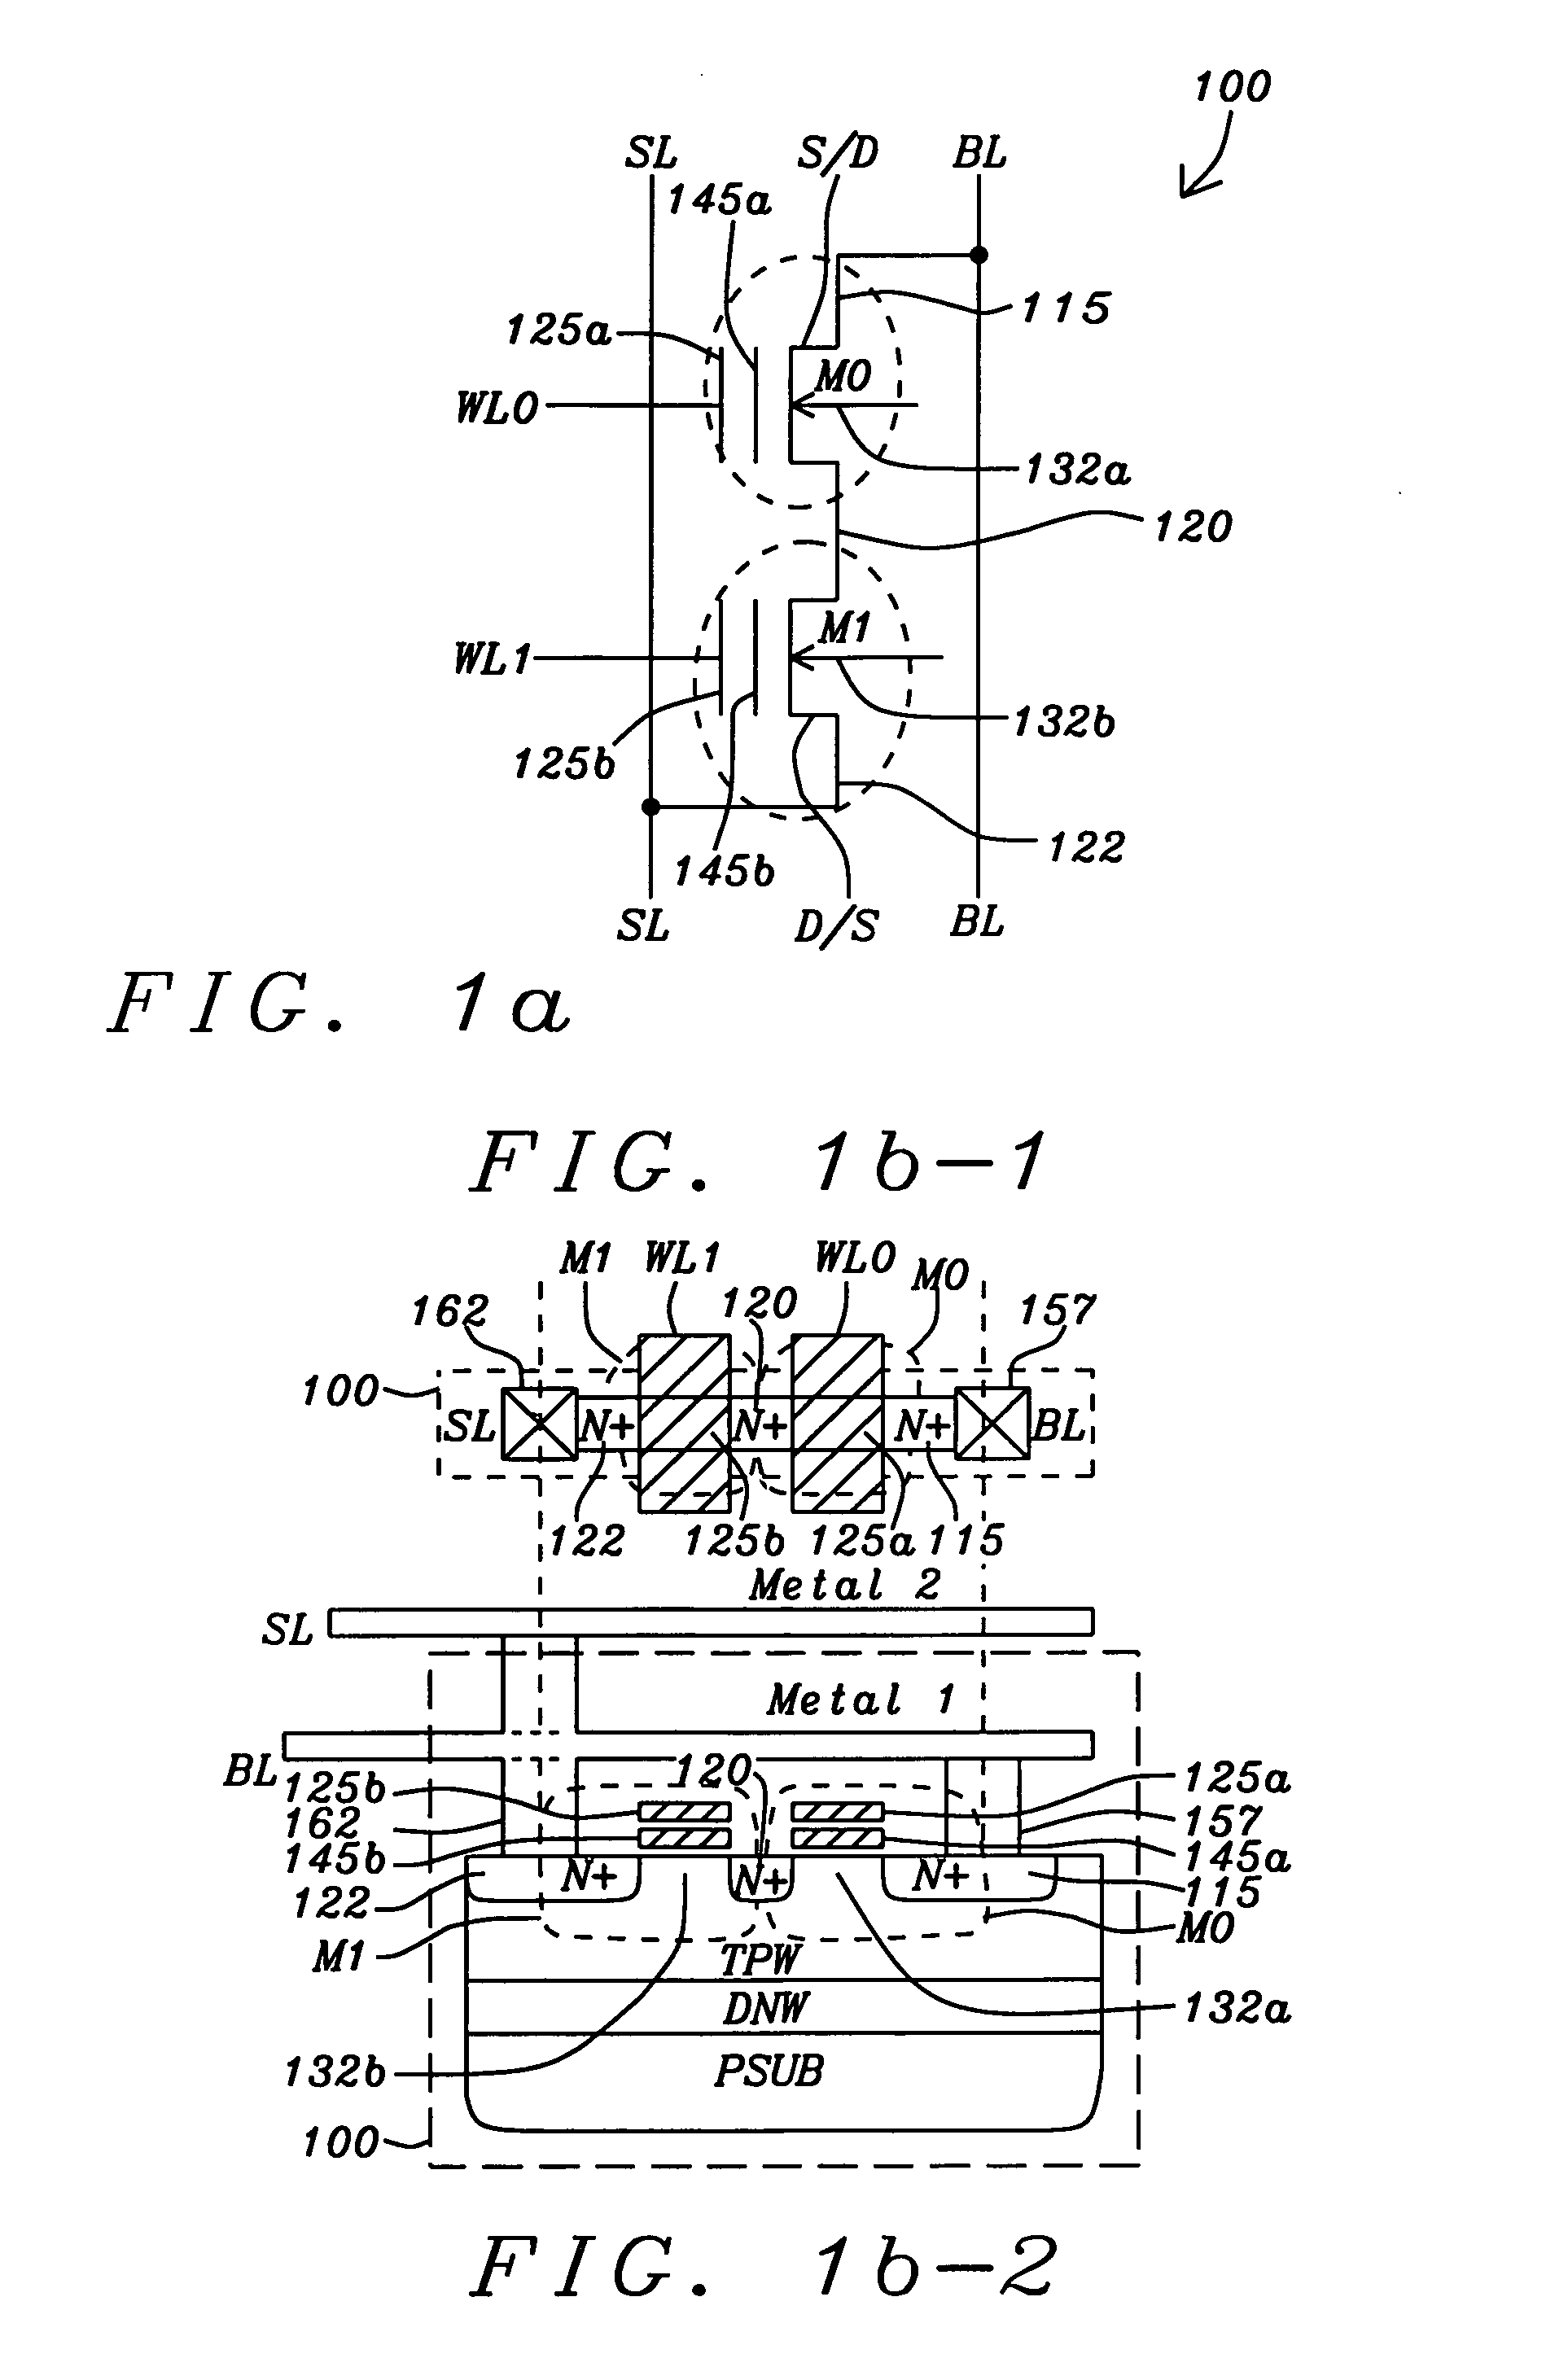 Embedded NOR flash memory process with NAND cell and true logic compatible low voltage device